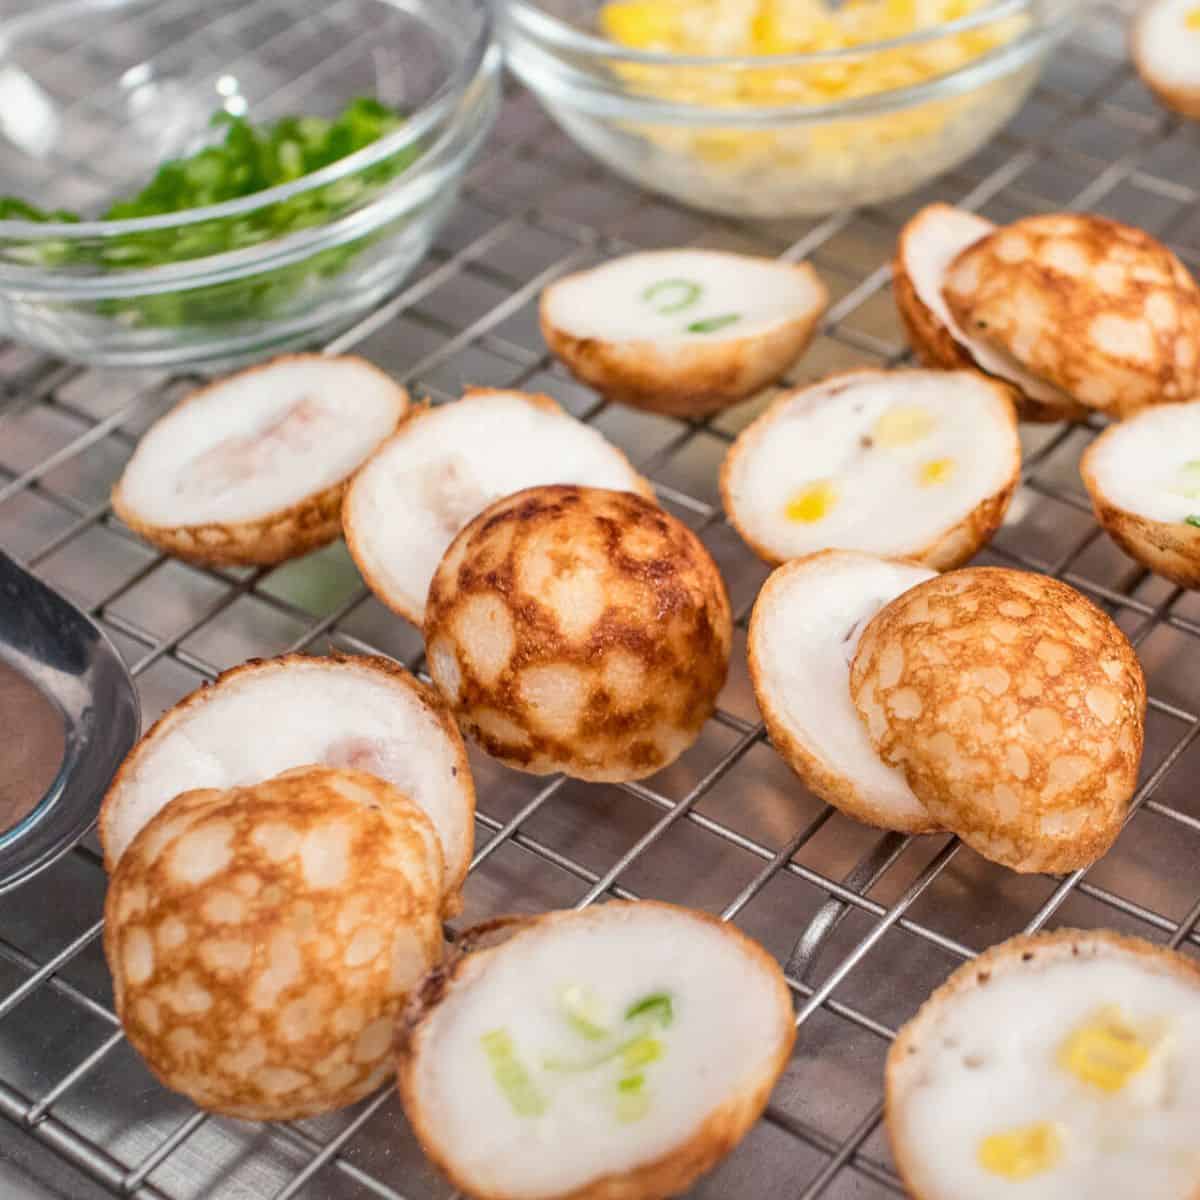 kanom krok pieces on a rack with bowls of green onions and corn